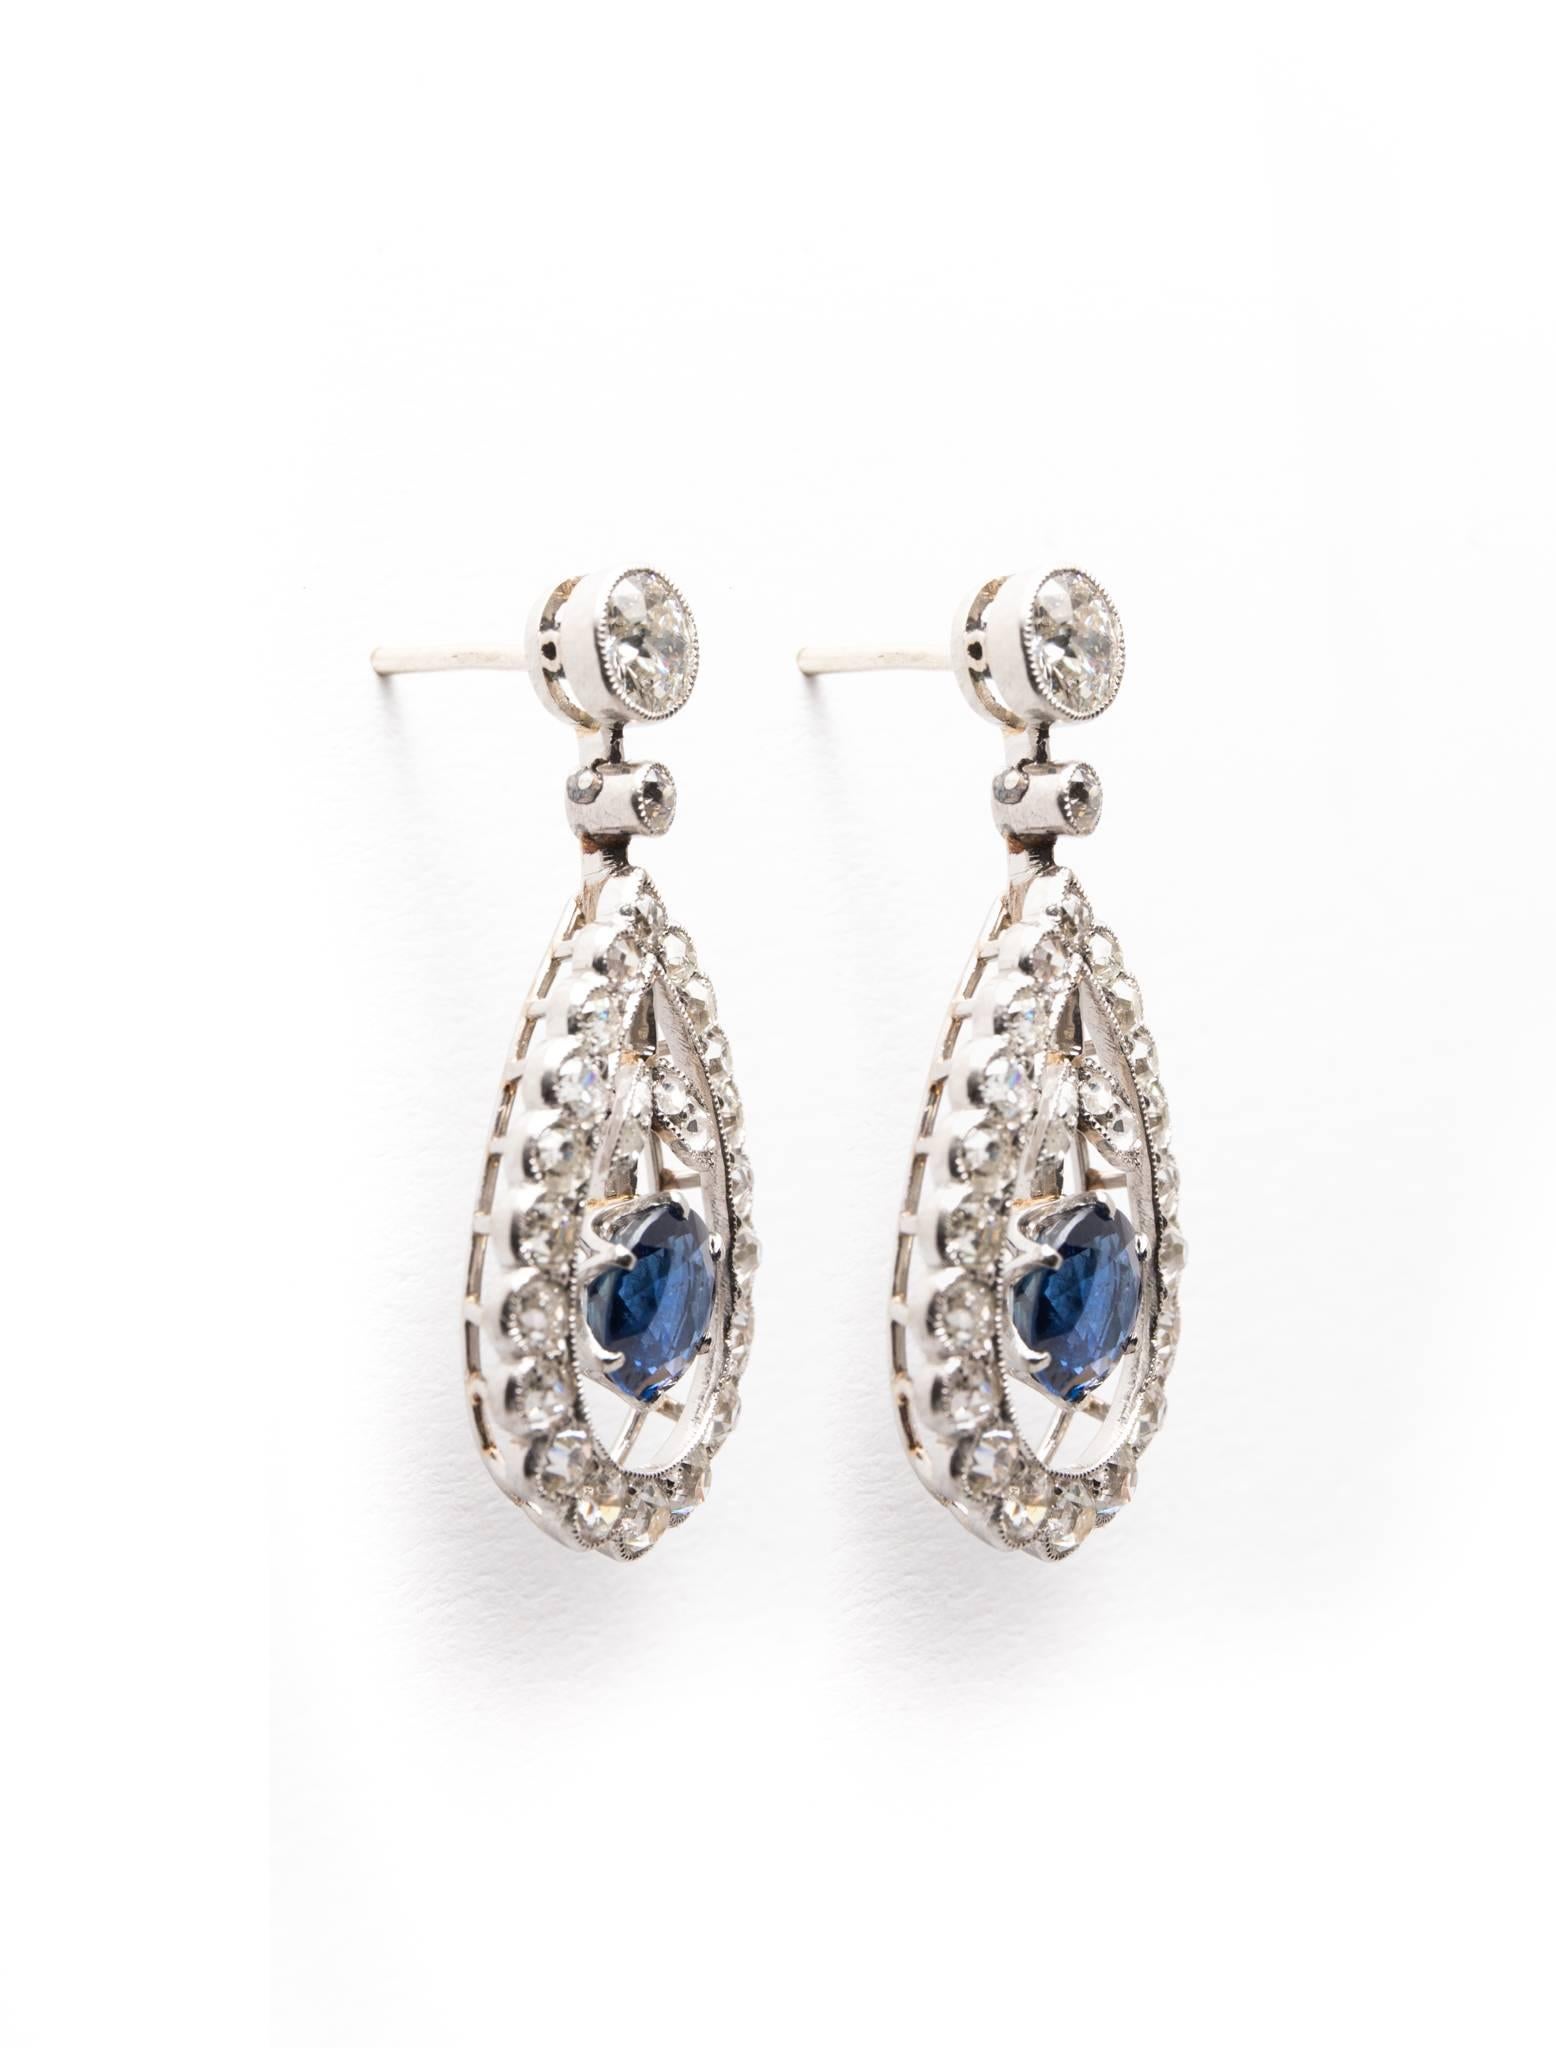 A truly fantastic pair of edwardian period sapphire, and diamond earrings in luxurious platinum.  Featuring a bezel set diamond at the top followed by dangling vivid blue sapphires encircled by diamonds these are truly a stunning pair of traditional